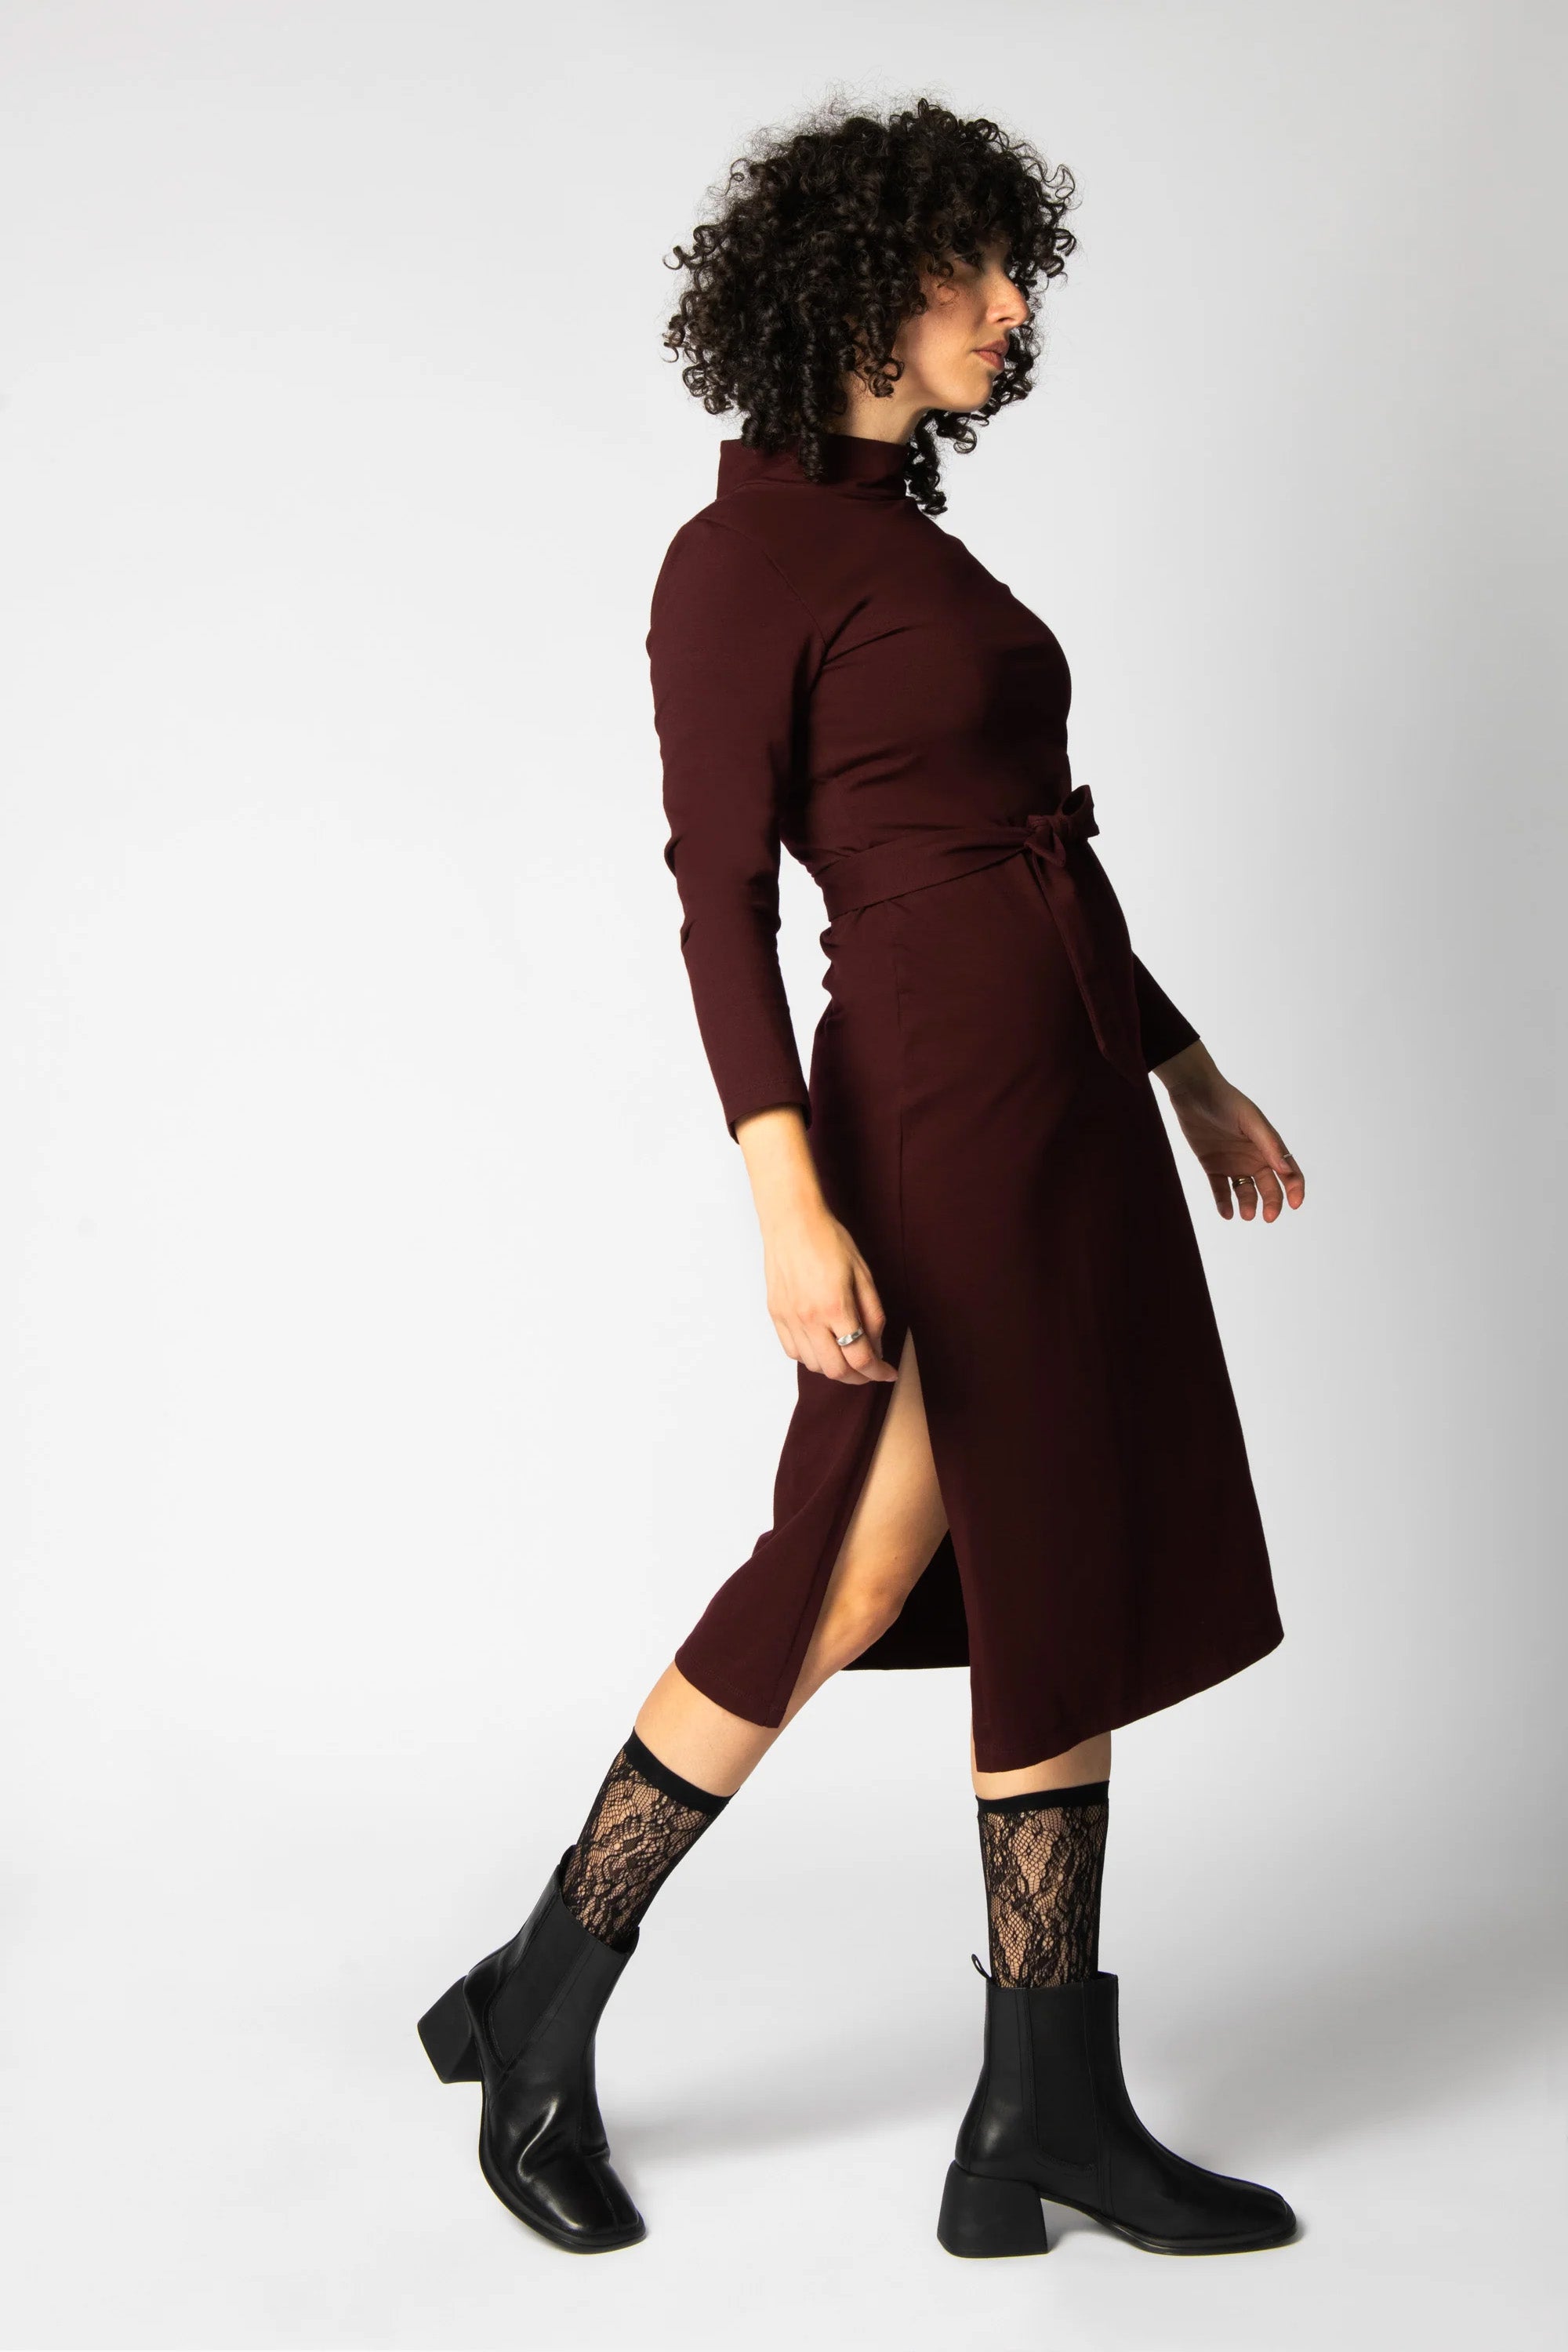 Basinger Long Dress by Eve Lavoie, Burgundy Cotton, OEKO-TEX certified cotton,turtleneck dress, midi-length, side slit, removable belt, sizes XS to XL, made in Montreal 